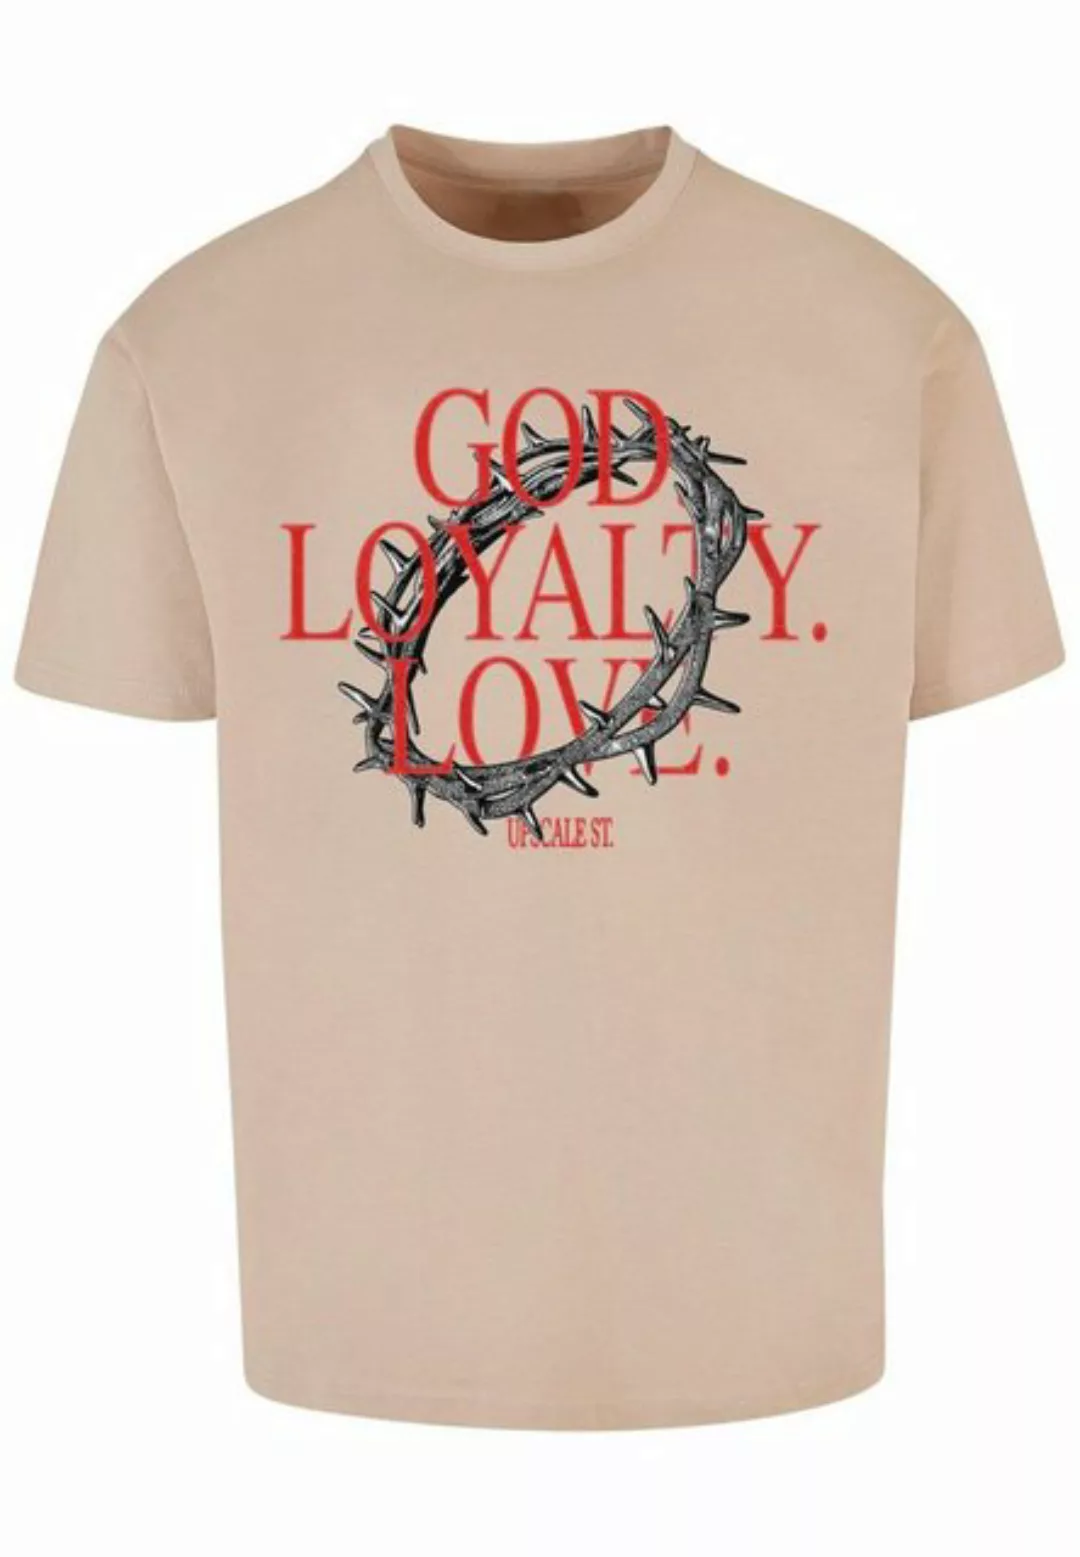 Upscale by Mister Tee T-Shirt Upscale by Mister Tee Unisex God Loyalty Love günstig online kaufen